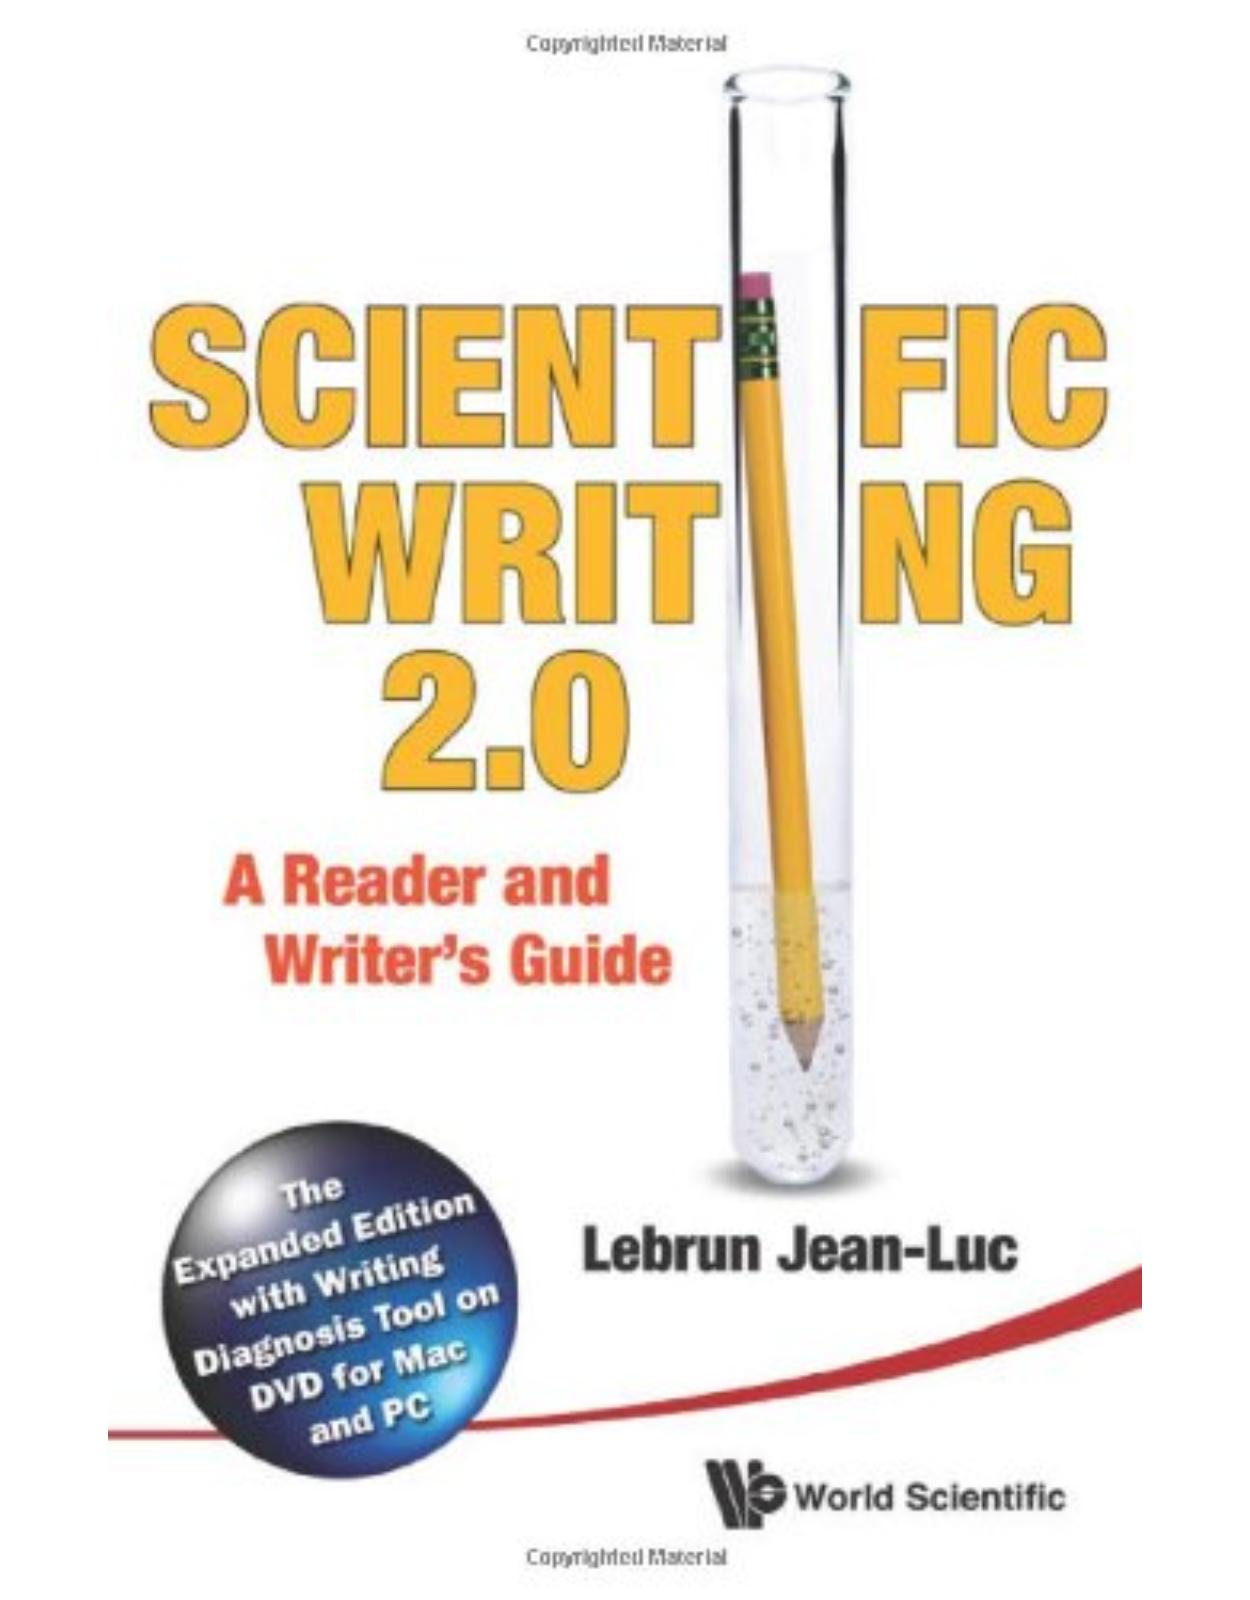 Scientific Writing: The Reader's and Writer's Guide 2.0: The Expanded Edition with Writing Diagnosis Tool on DVD for Mac and PC 